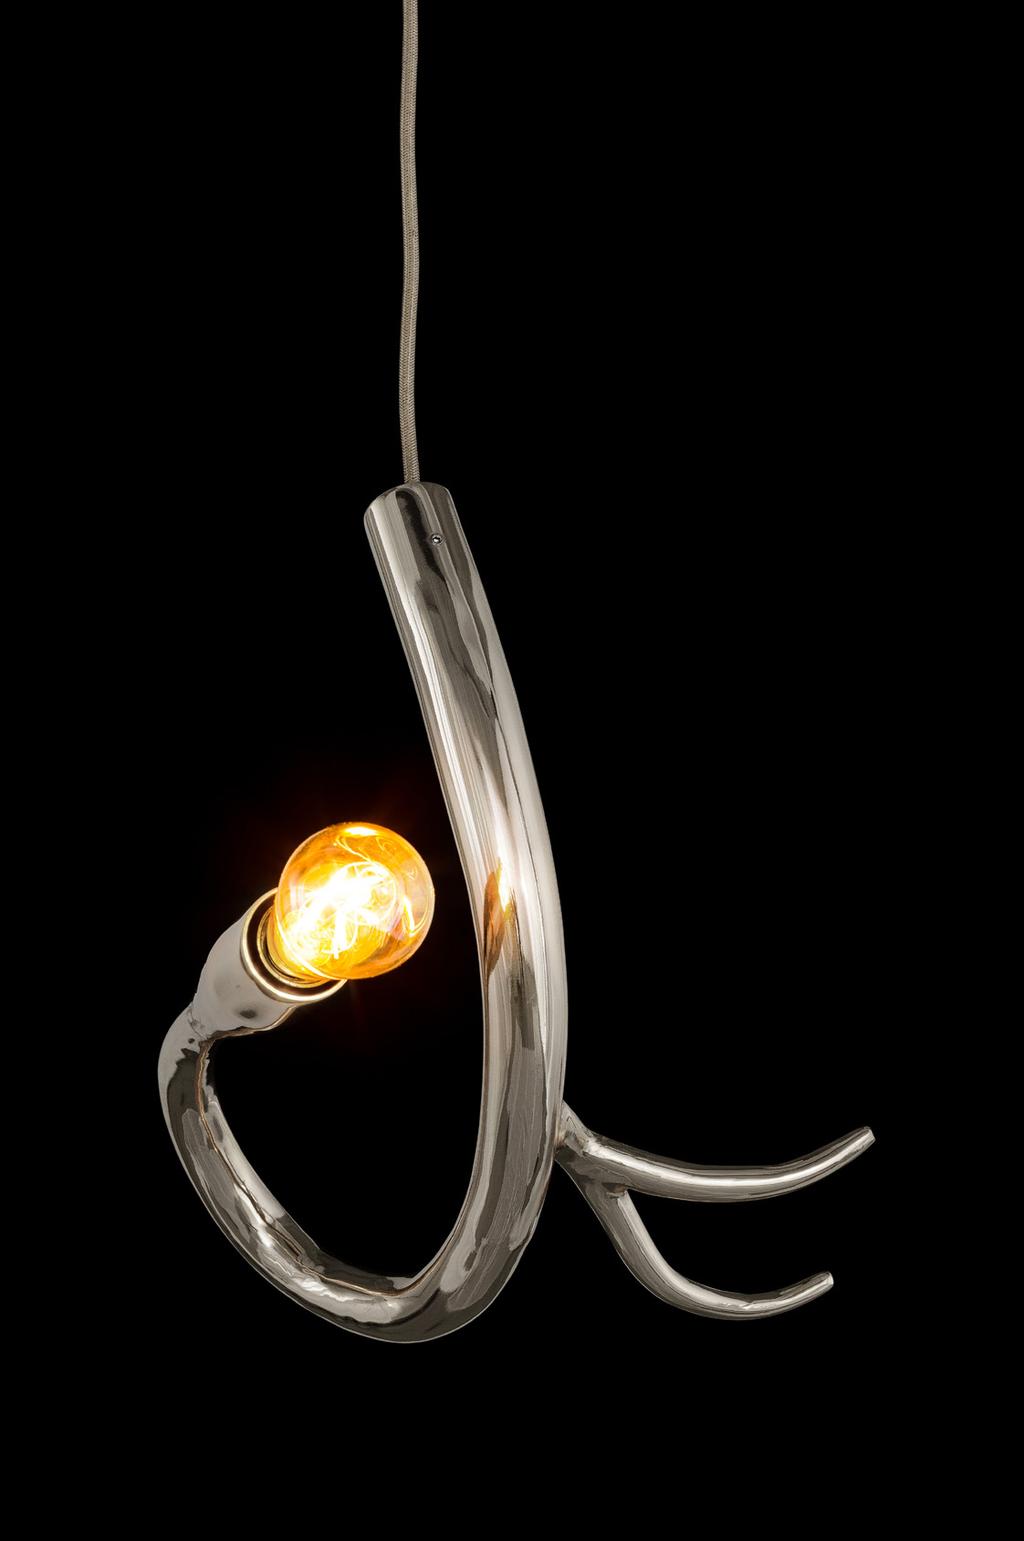 Edison s Tail Design by William Brand Unadorned yet full of energy, contemporary and elegant: Edison s Tail moves freely through space and reveals that bringing light and vitality can go hand in hand.